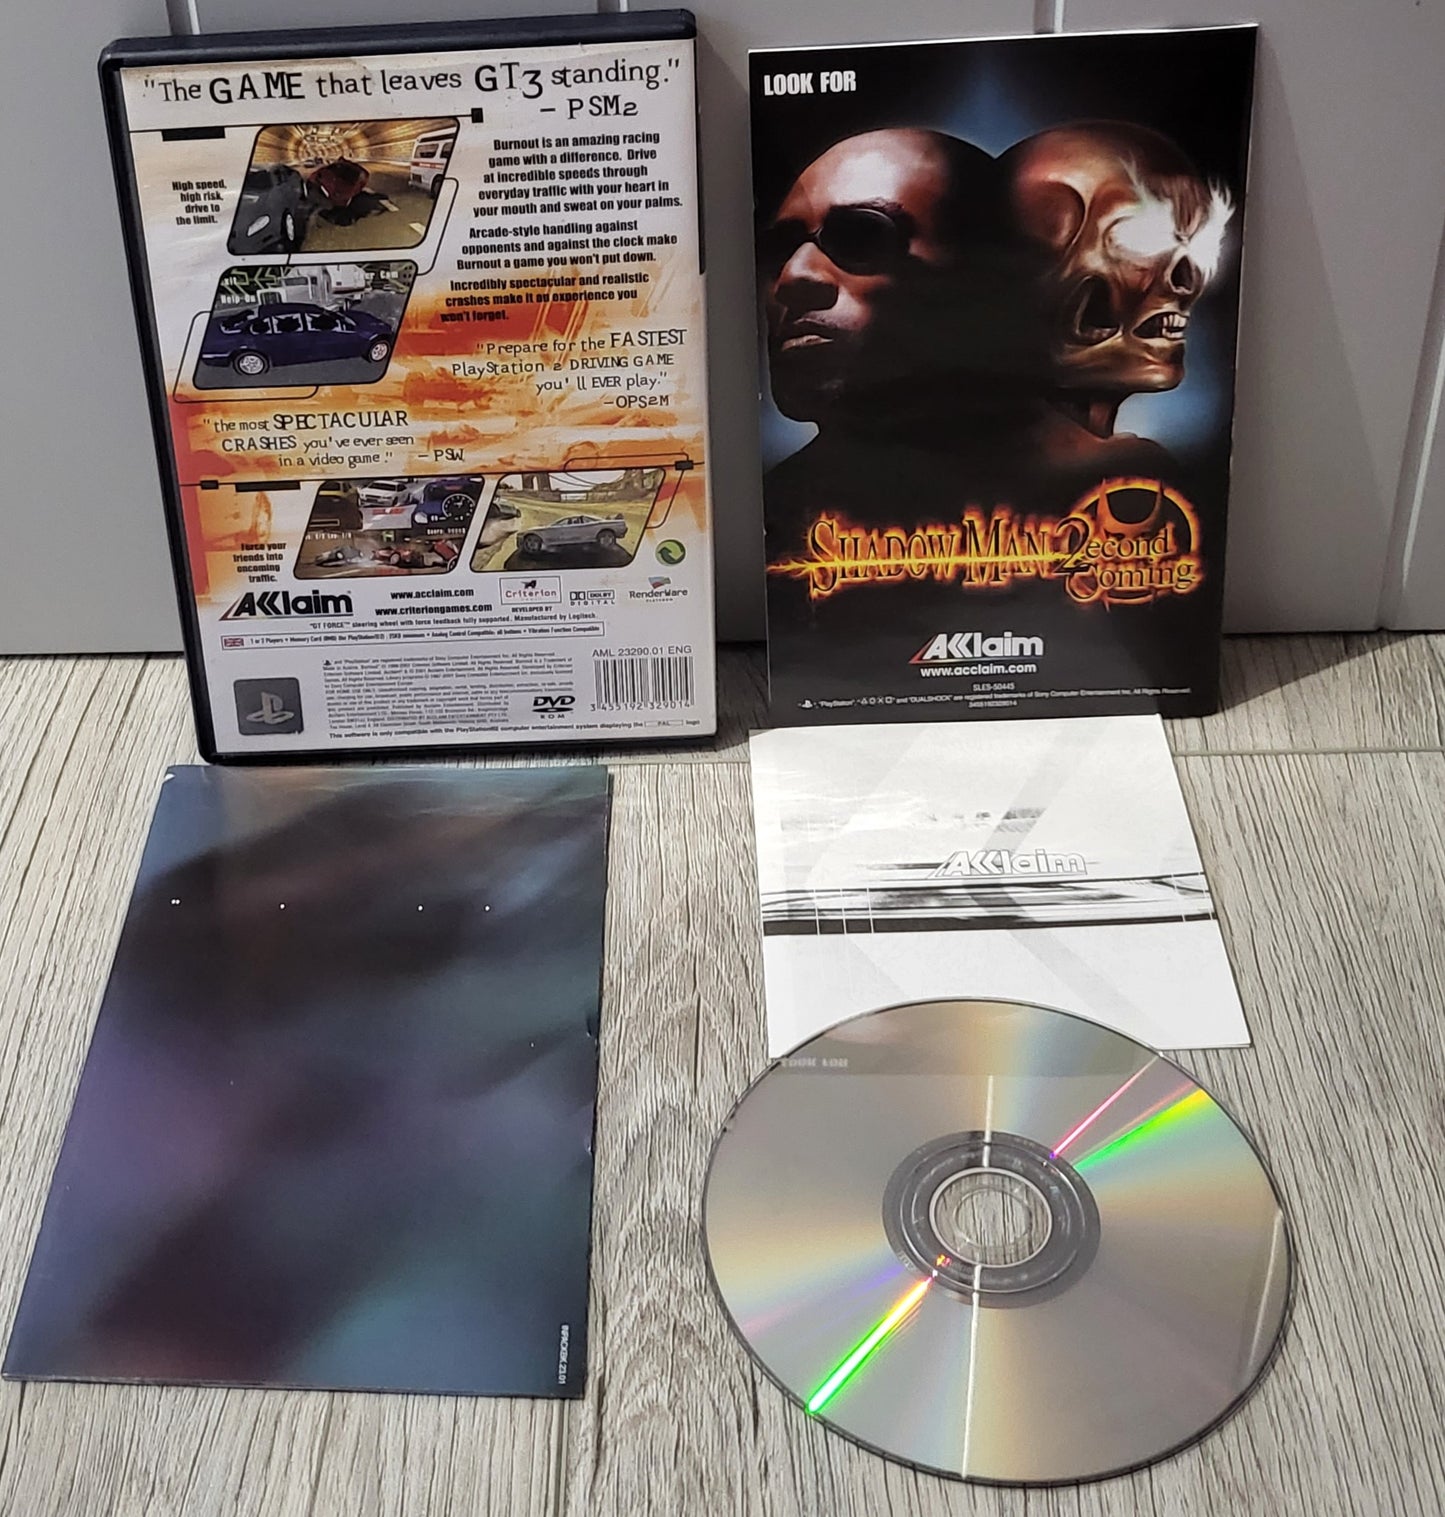 Burnout Sony Playstation 2 (PS2) Game